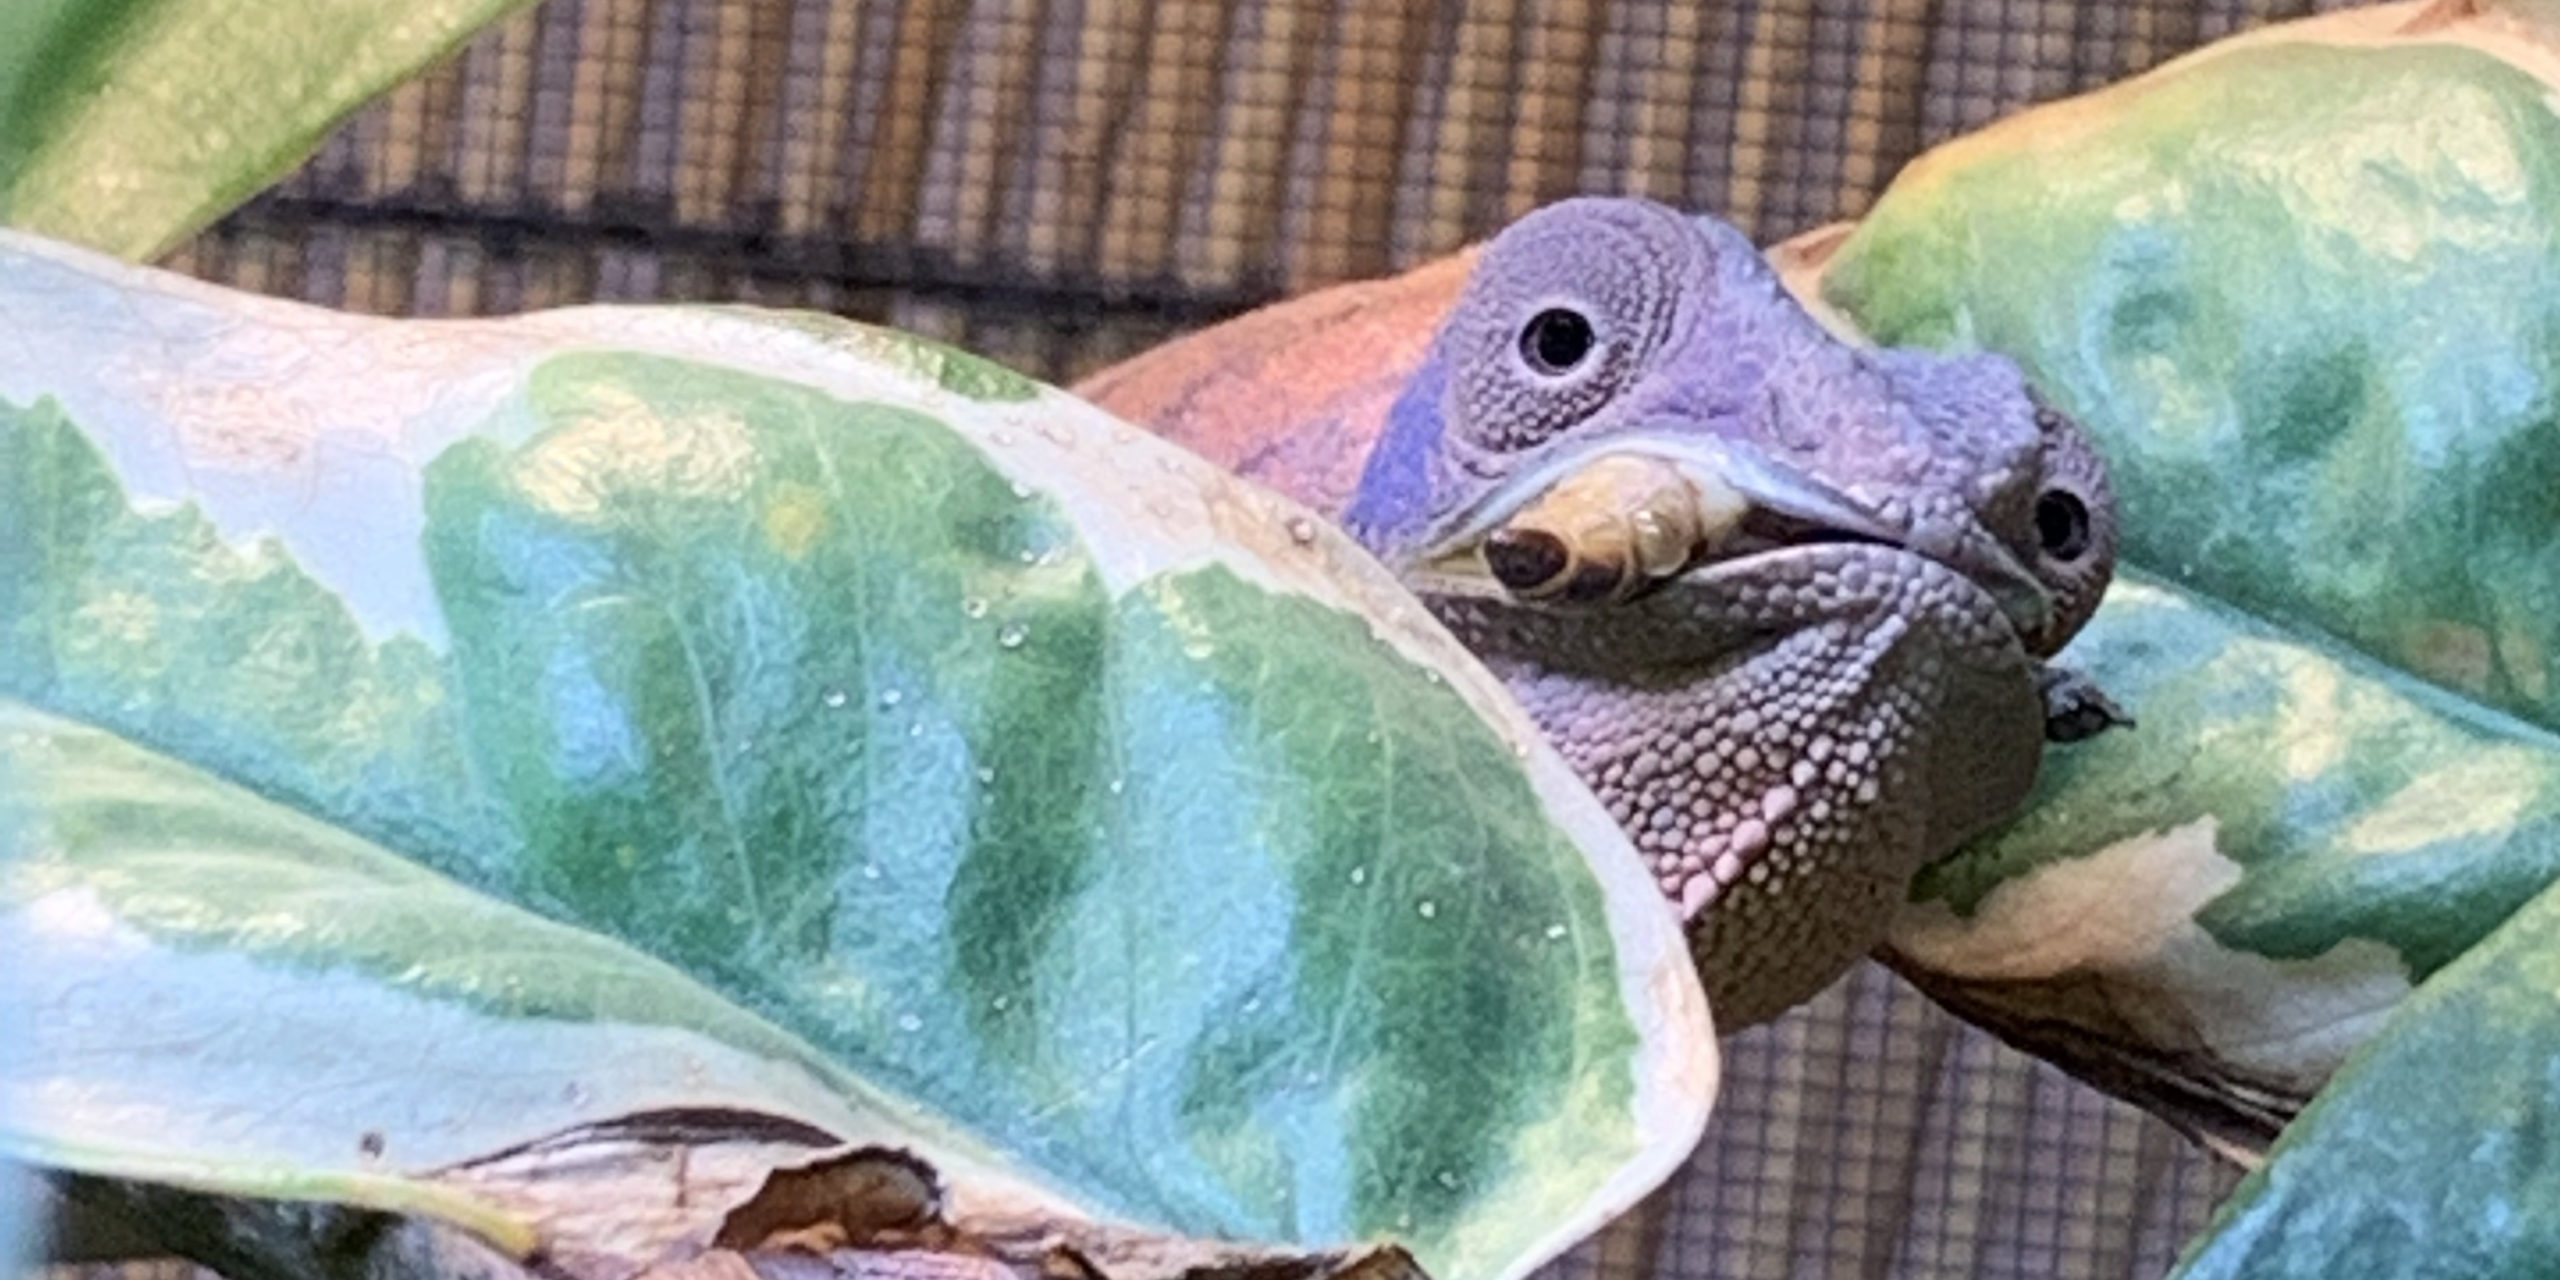 Do You Have a Picky Chameleon? Here's Why